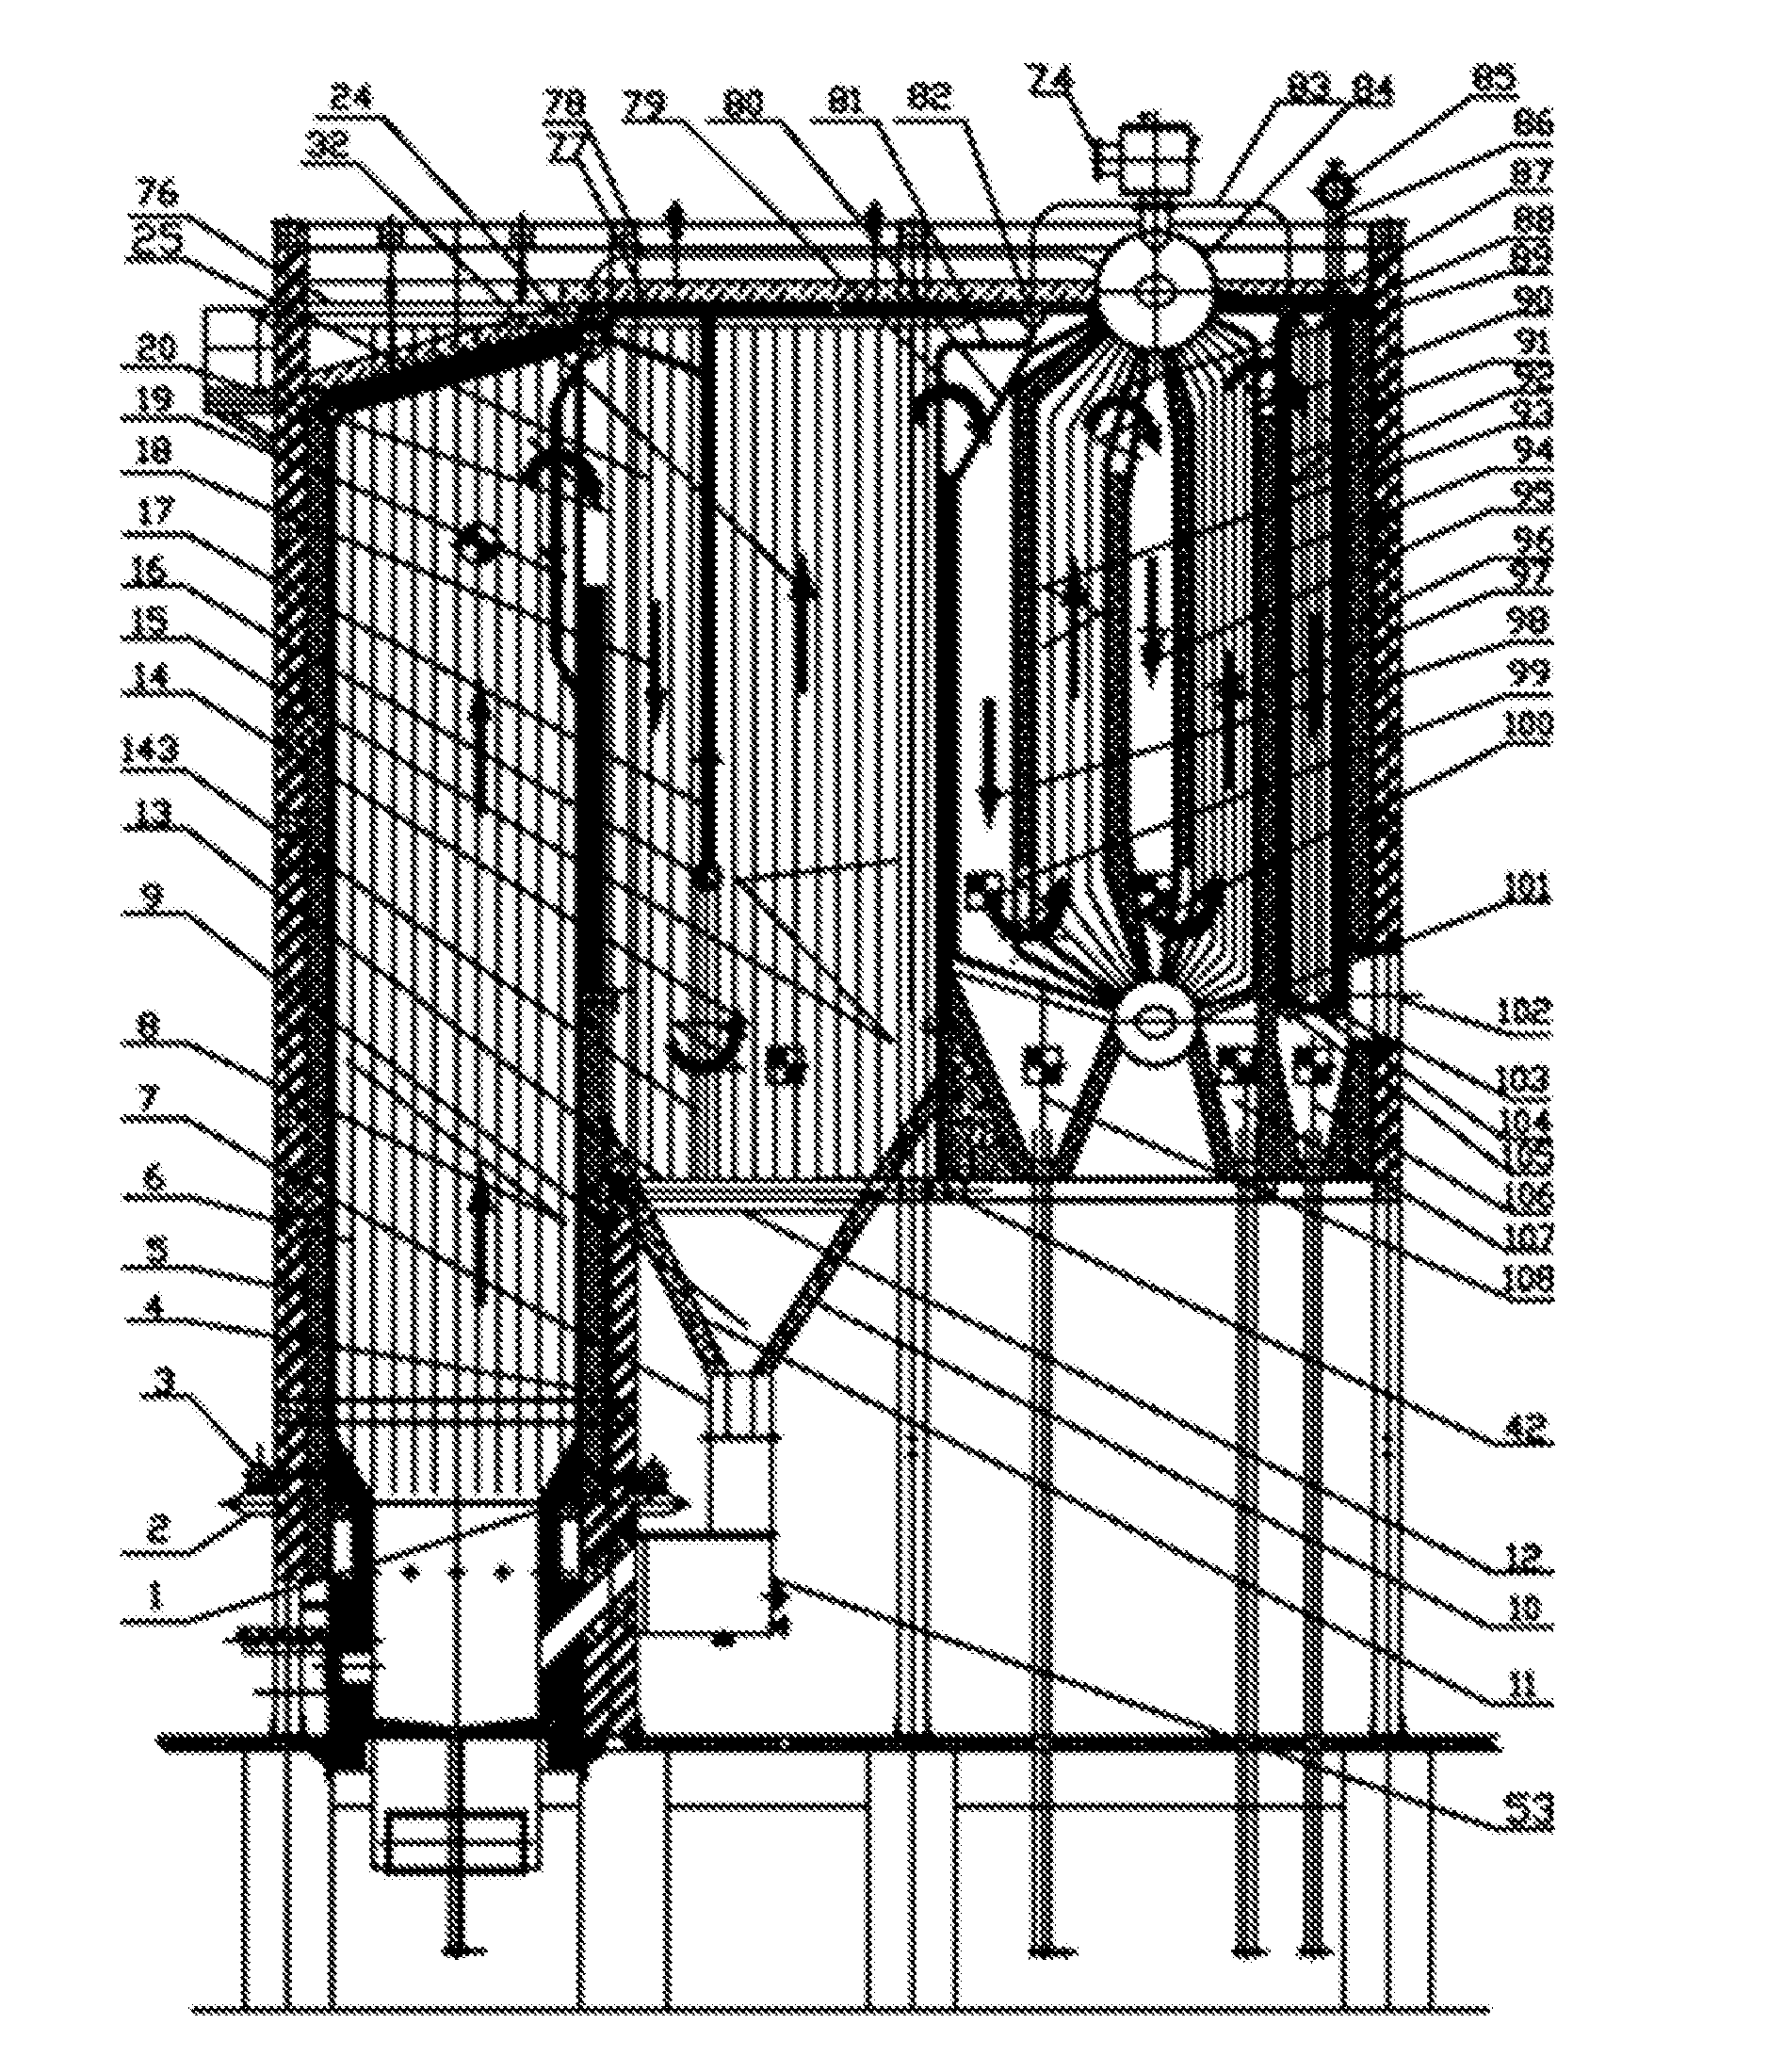 Fluidized-bed boiler integrating multifunctional inertia-gravity separator with multiple furnace profiles